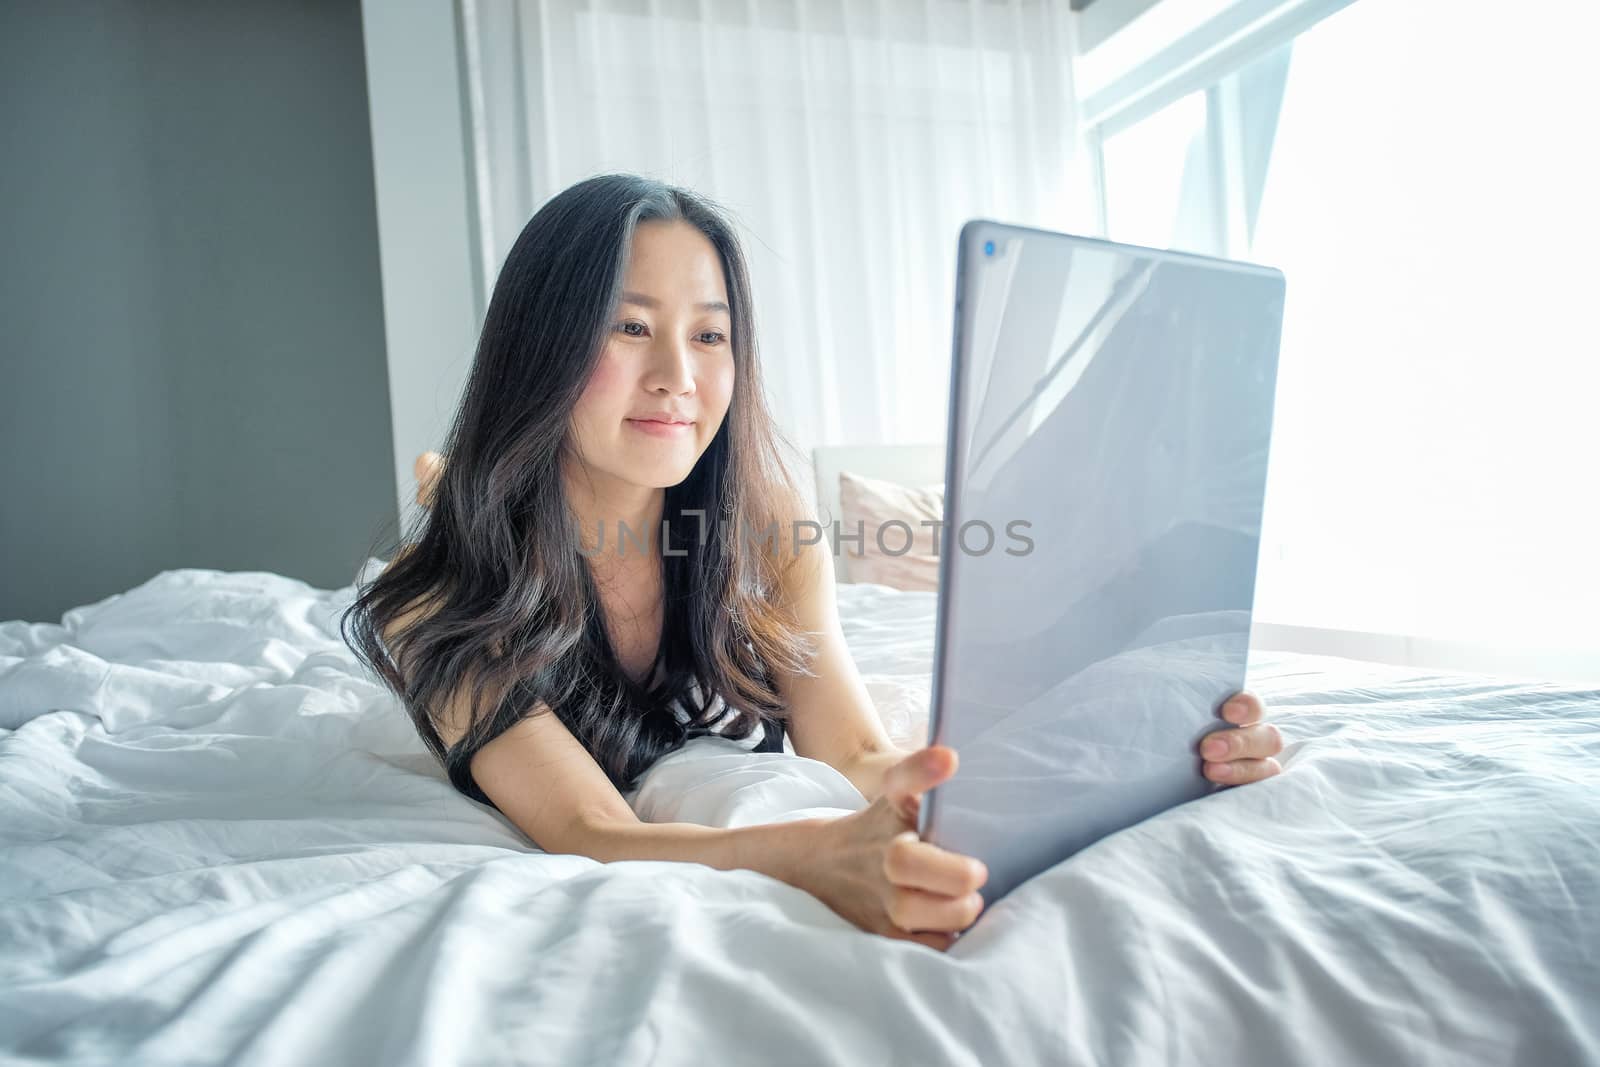 Yound woman using tablet on the bed  by Surasak